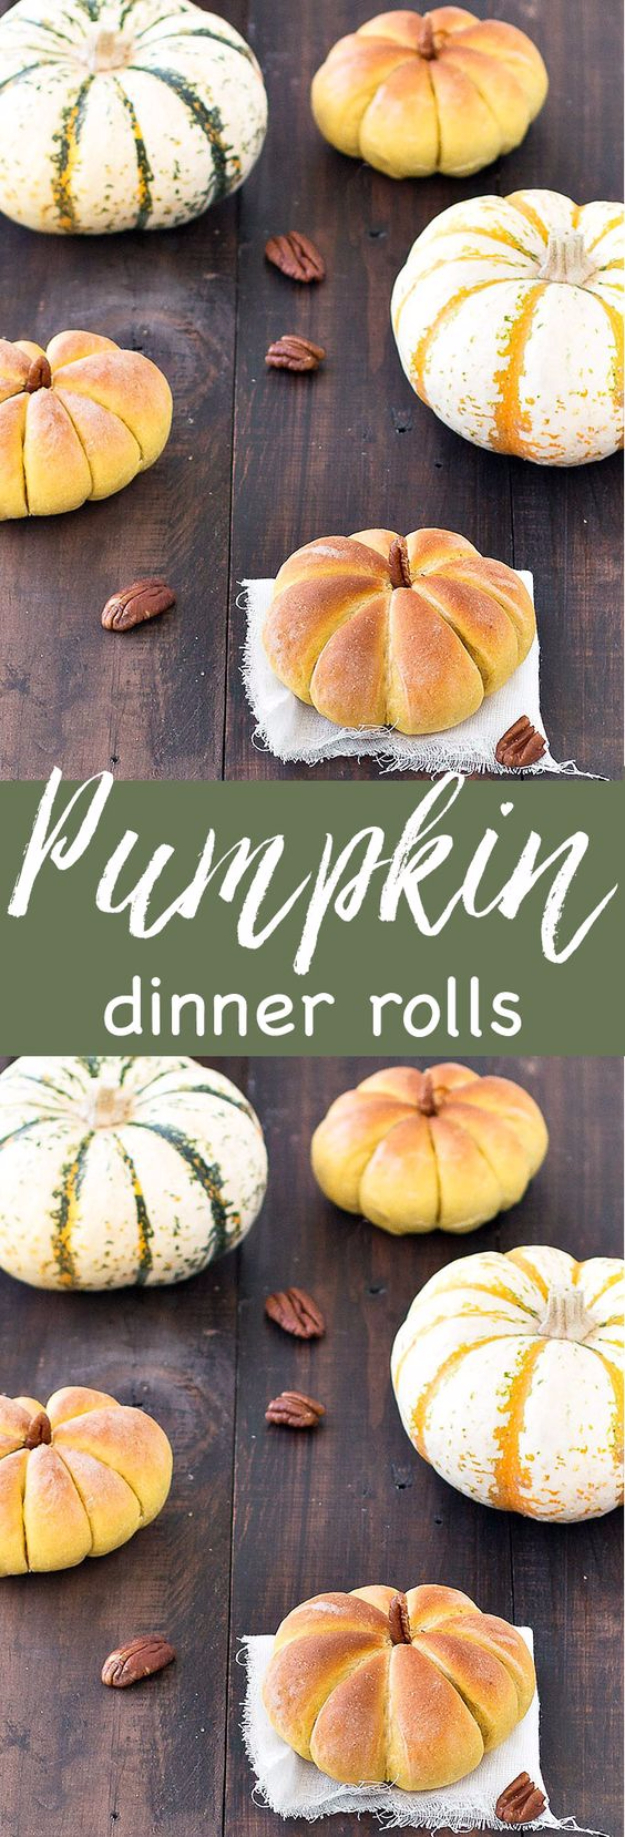 Best Thanksgiving Dinner Recipes - Pumpkin Dinner Rolls - Easy DIY Desserts, Sides, Sauces, Main Courses, Vegetables, Pie and Side Dishes. Simple Gravy, Cranberries, Turkey and Pies With Step by Step Tutorials http://diyjoy.com/best-thanksgiving-dinner-recipes